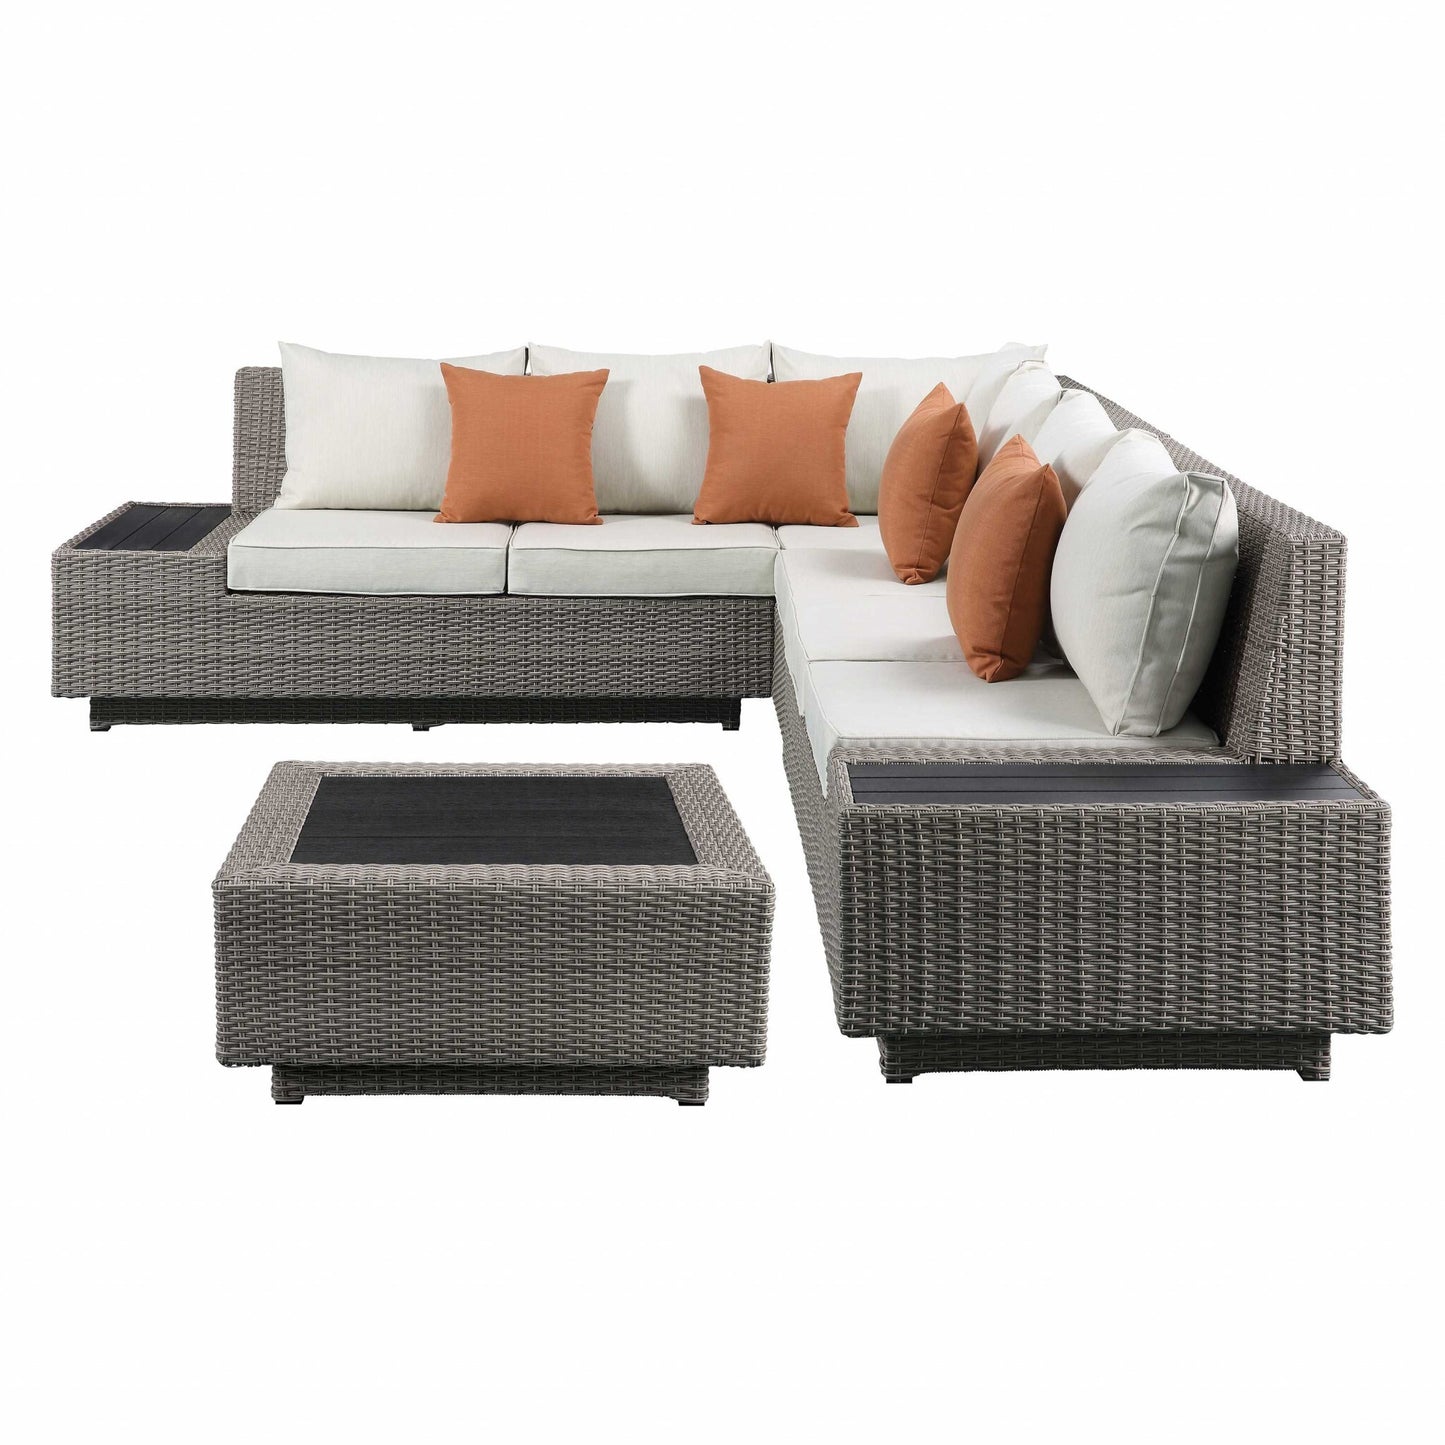 126' X 100' X 30' Beige Fabric And Gray Wicker Patio Sectional And Cocktail Table